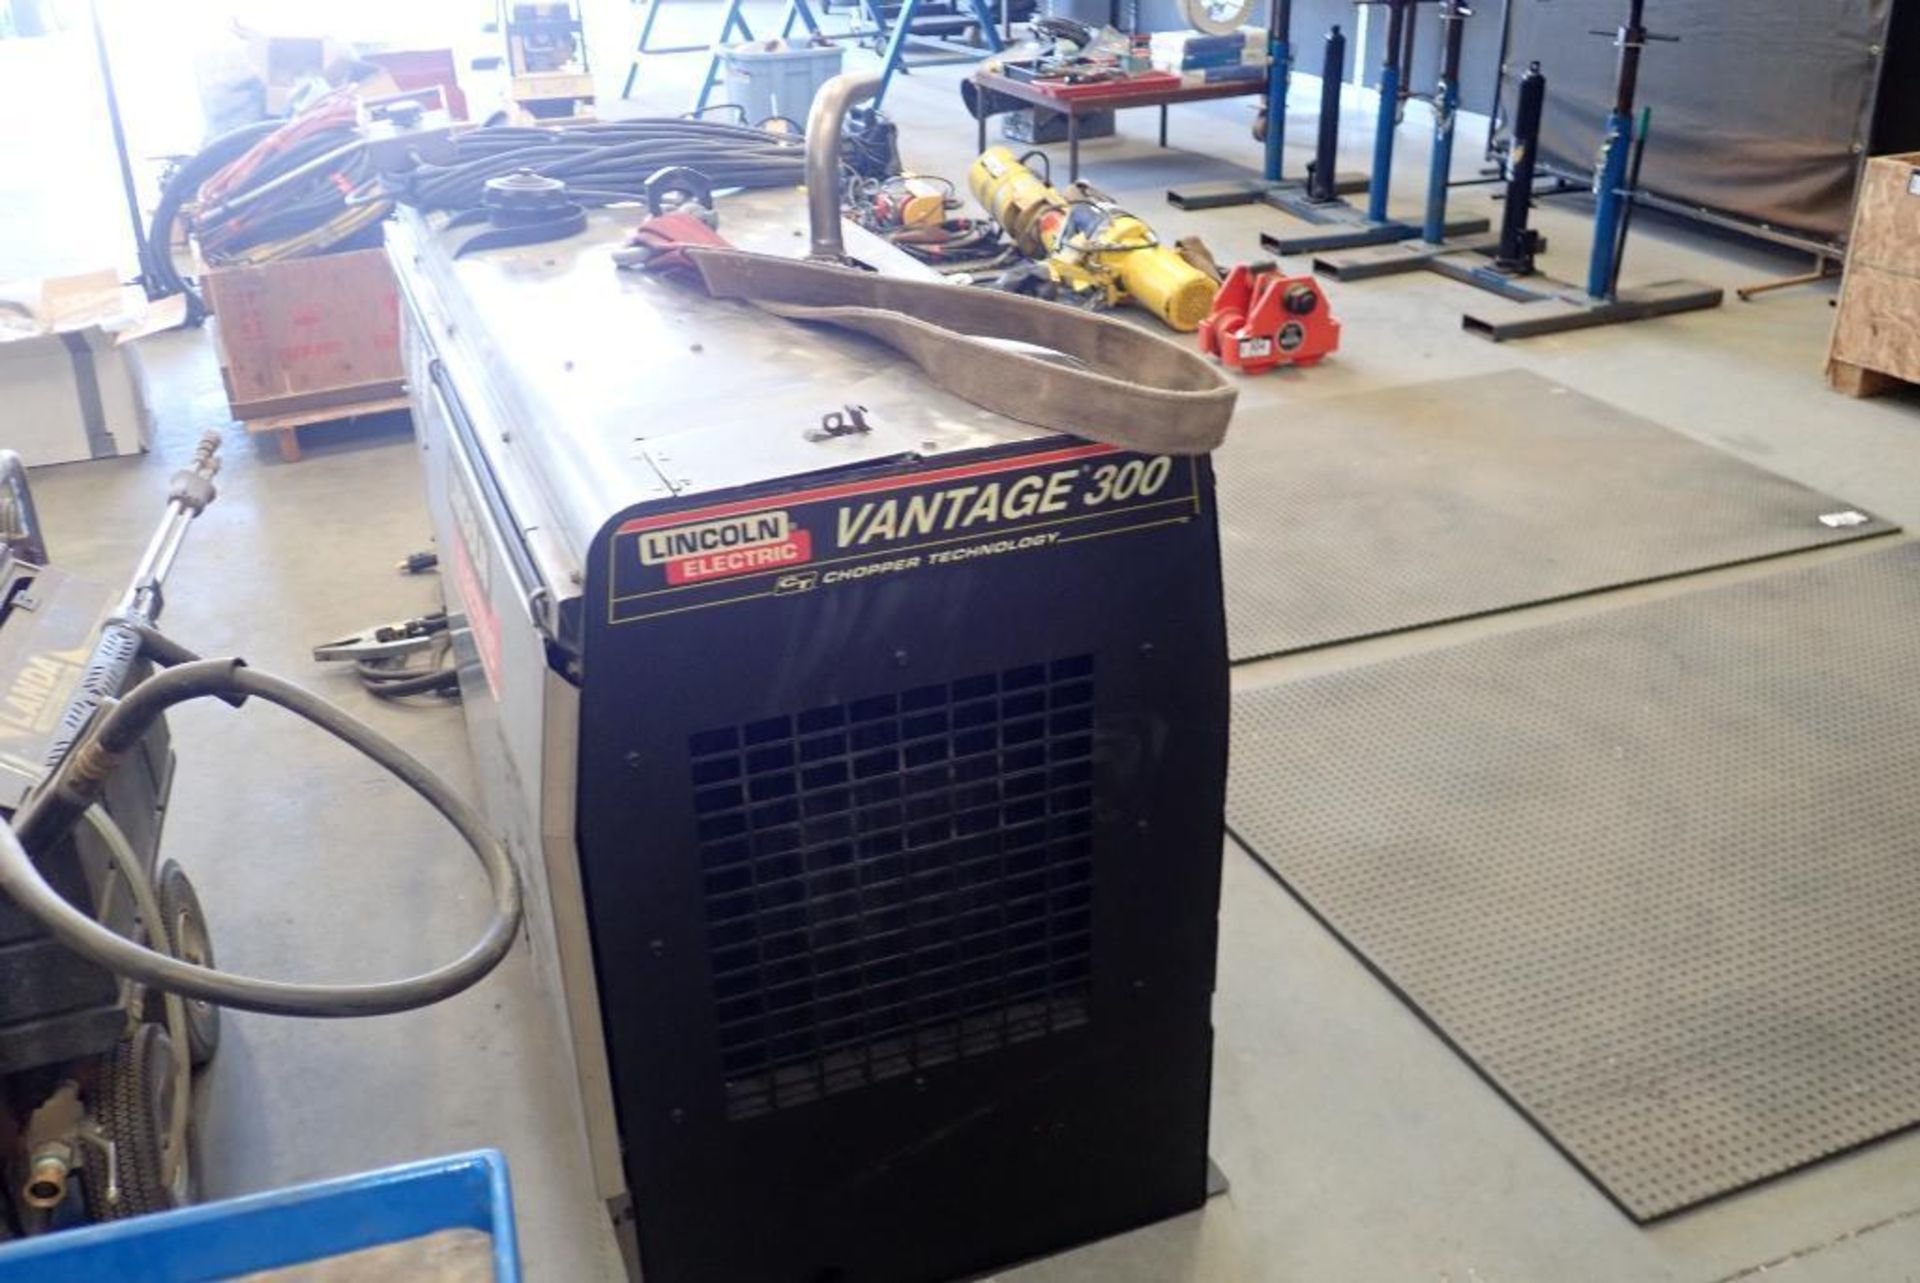 2007 Lincoln Electric Vantage 300 Diesel Portable Welder w/ Remote, Showing 2,079hrs SN U1070908955. - Image 5 of 8